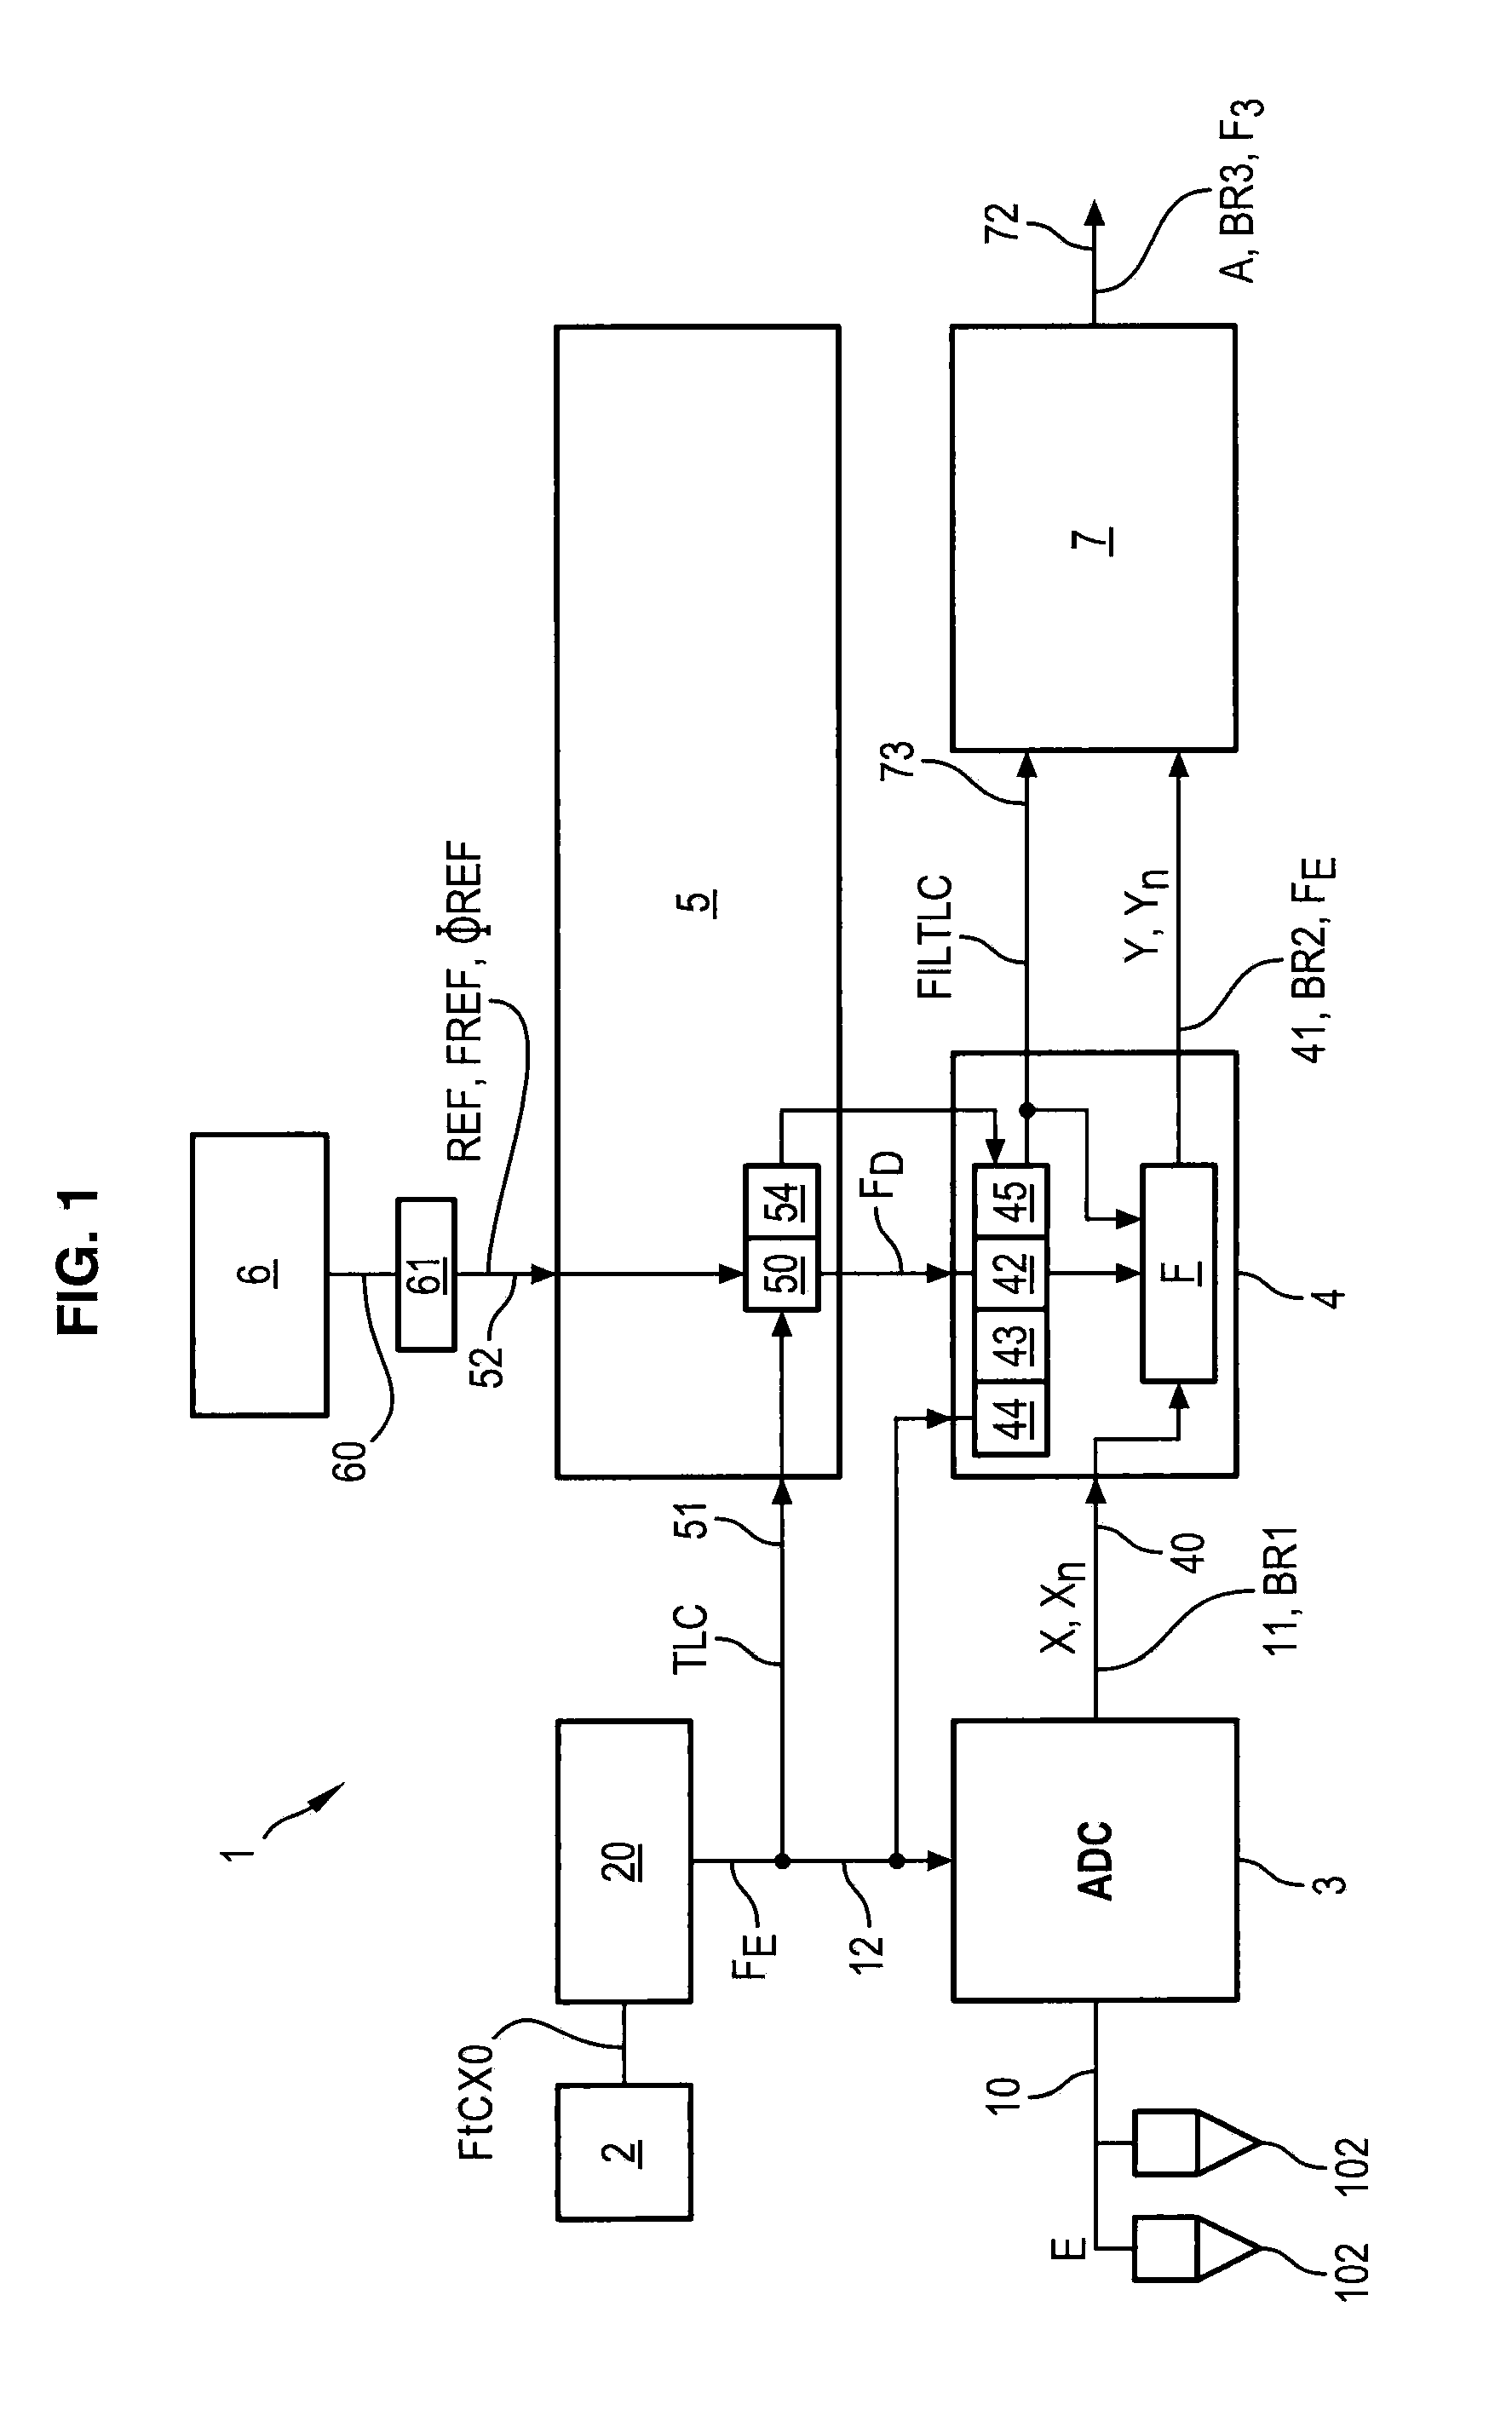 Data acquisition apparatus and method